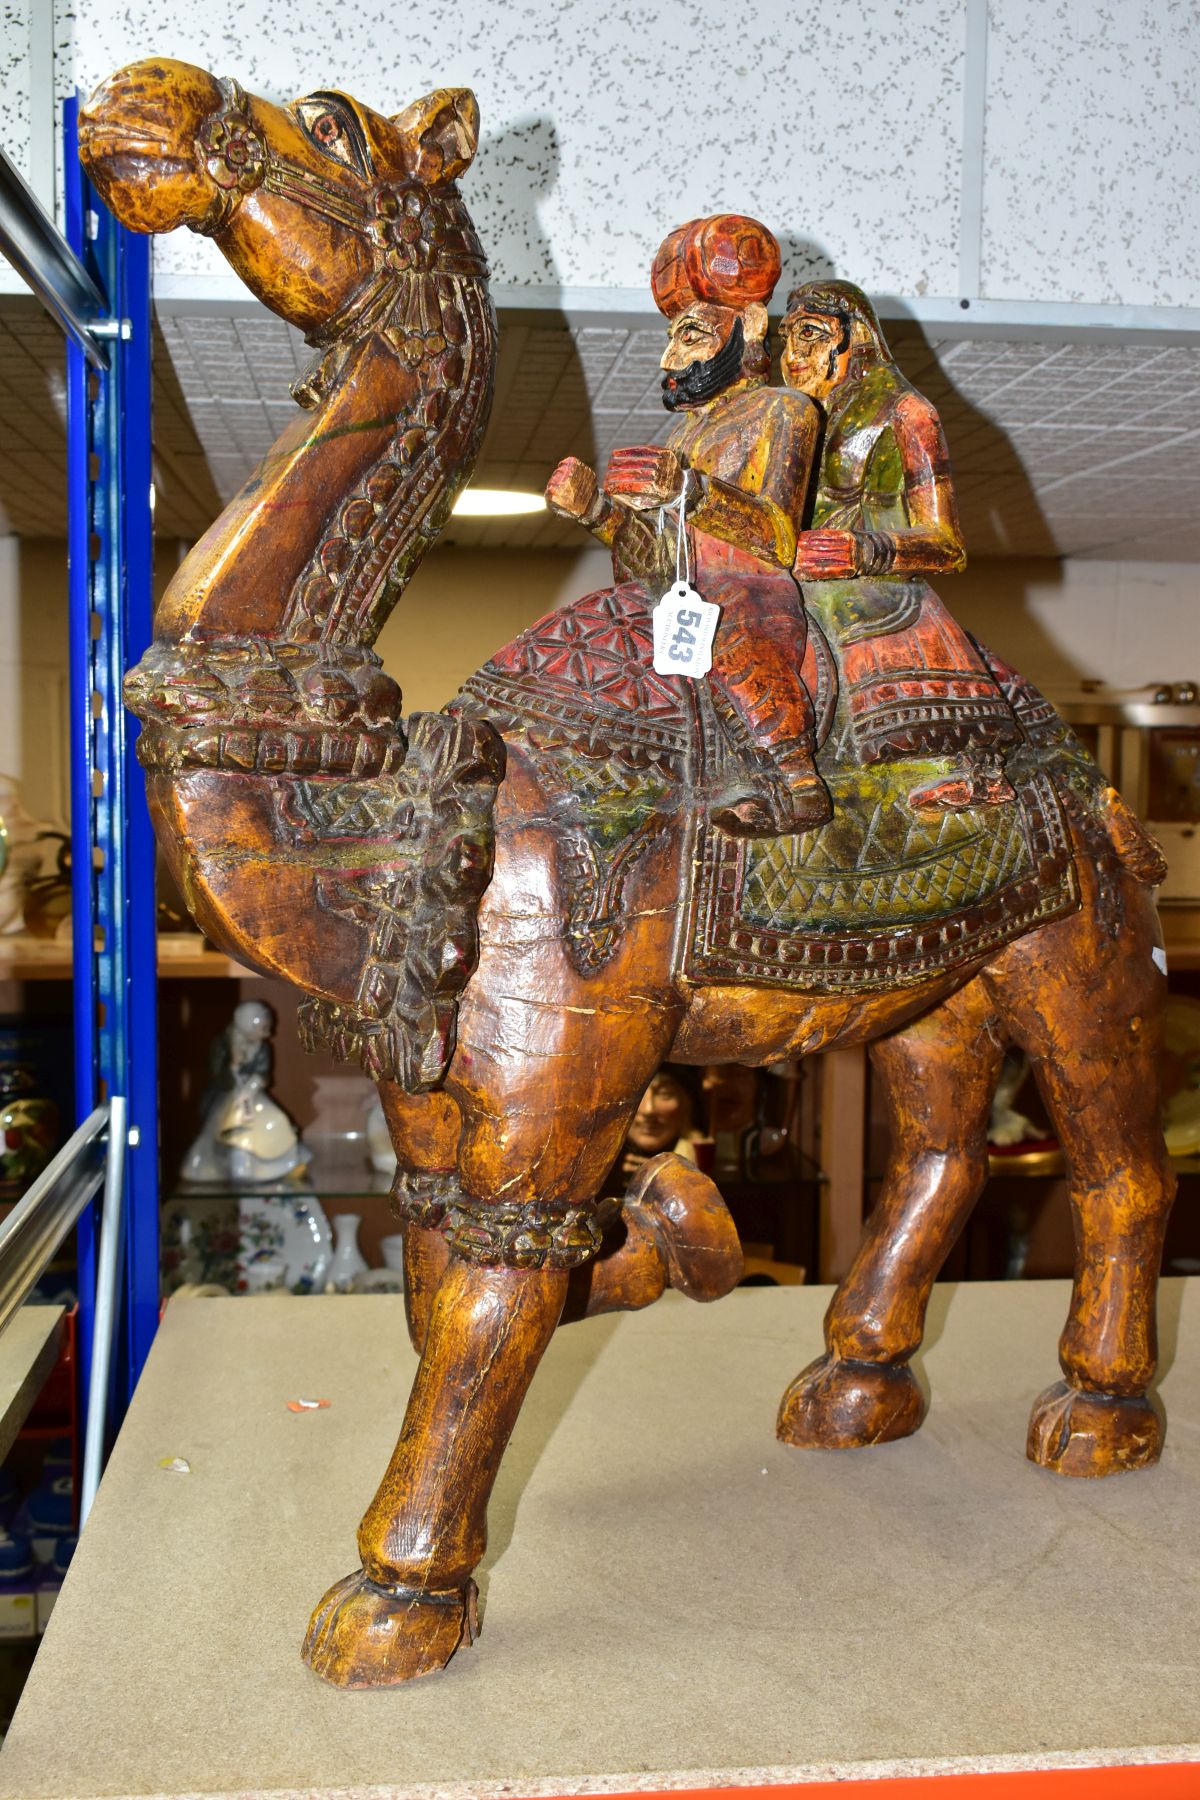 A LARGE WOODEN CARVED CAMEL WITH RIDERS, with carved and painted details, it may depict the